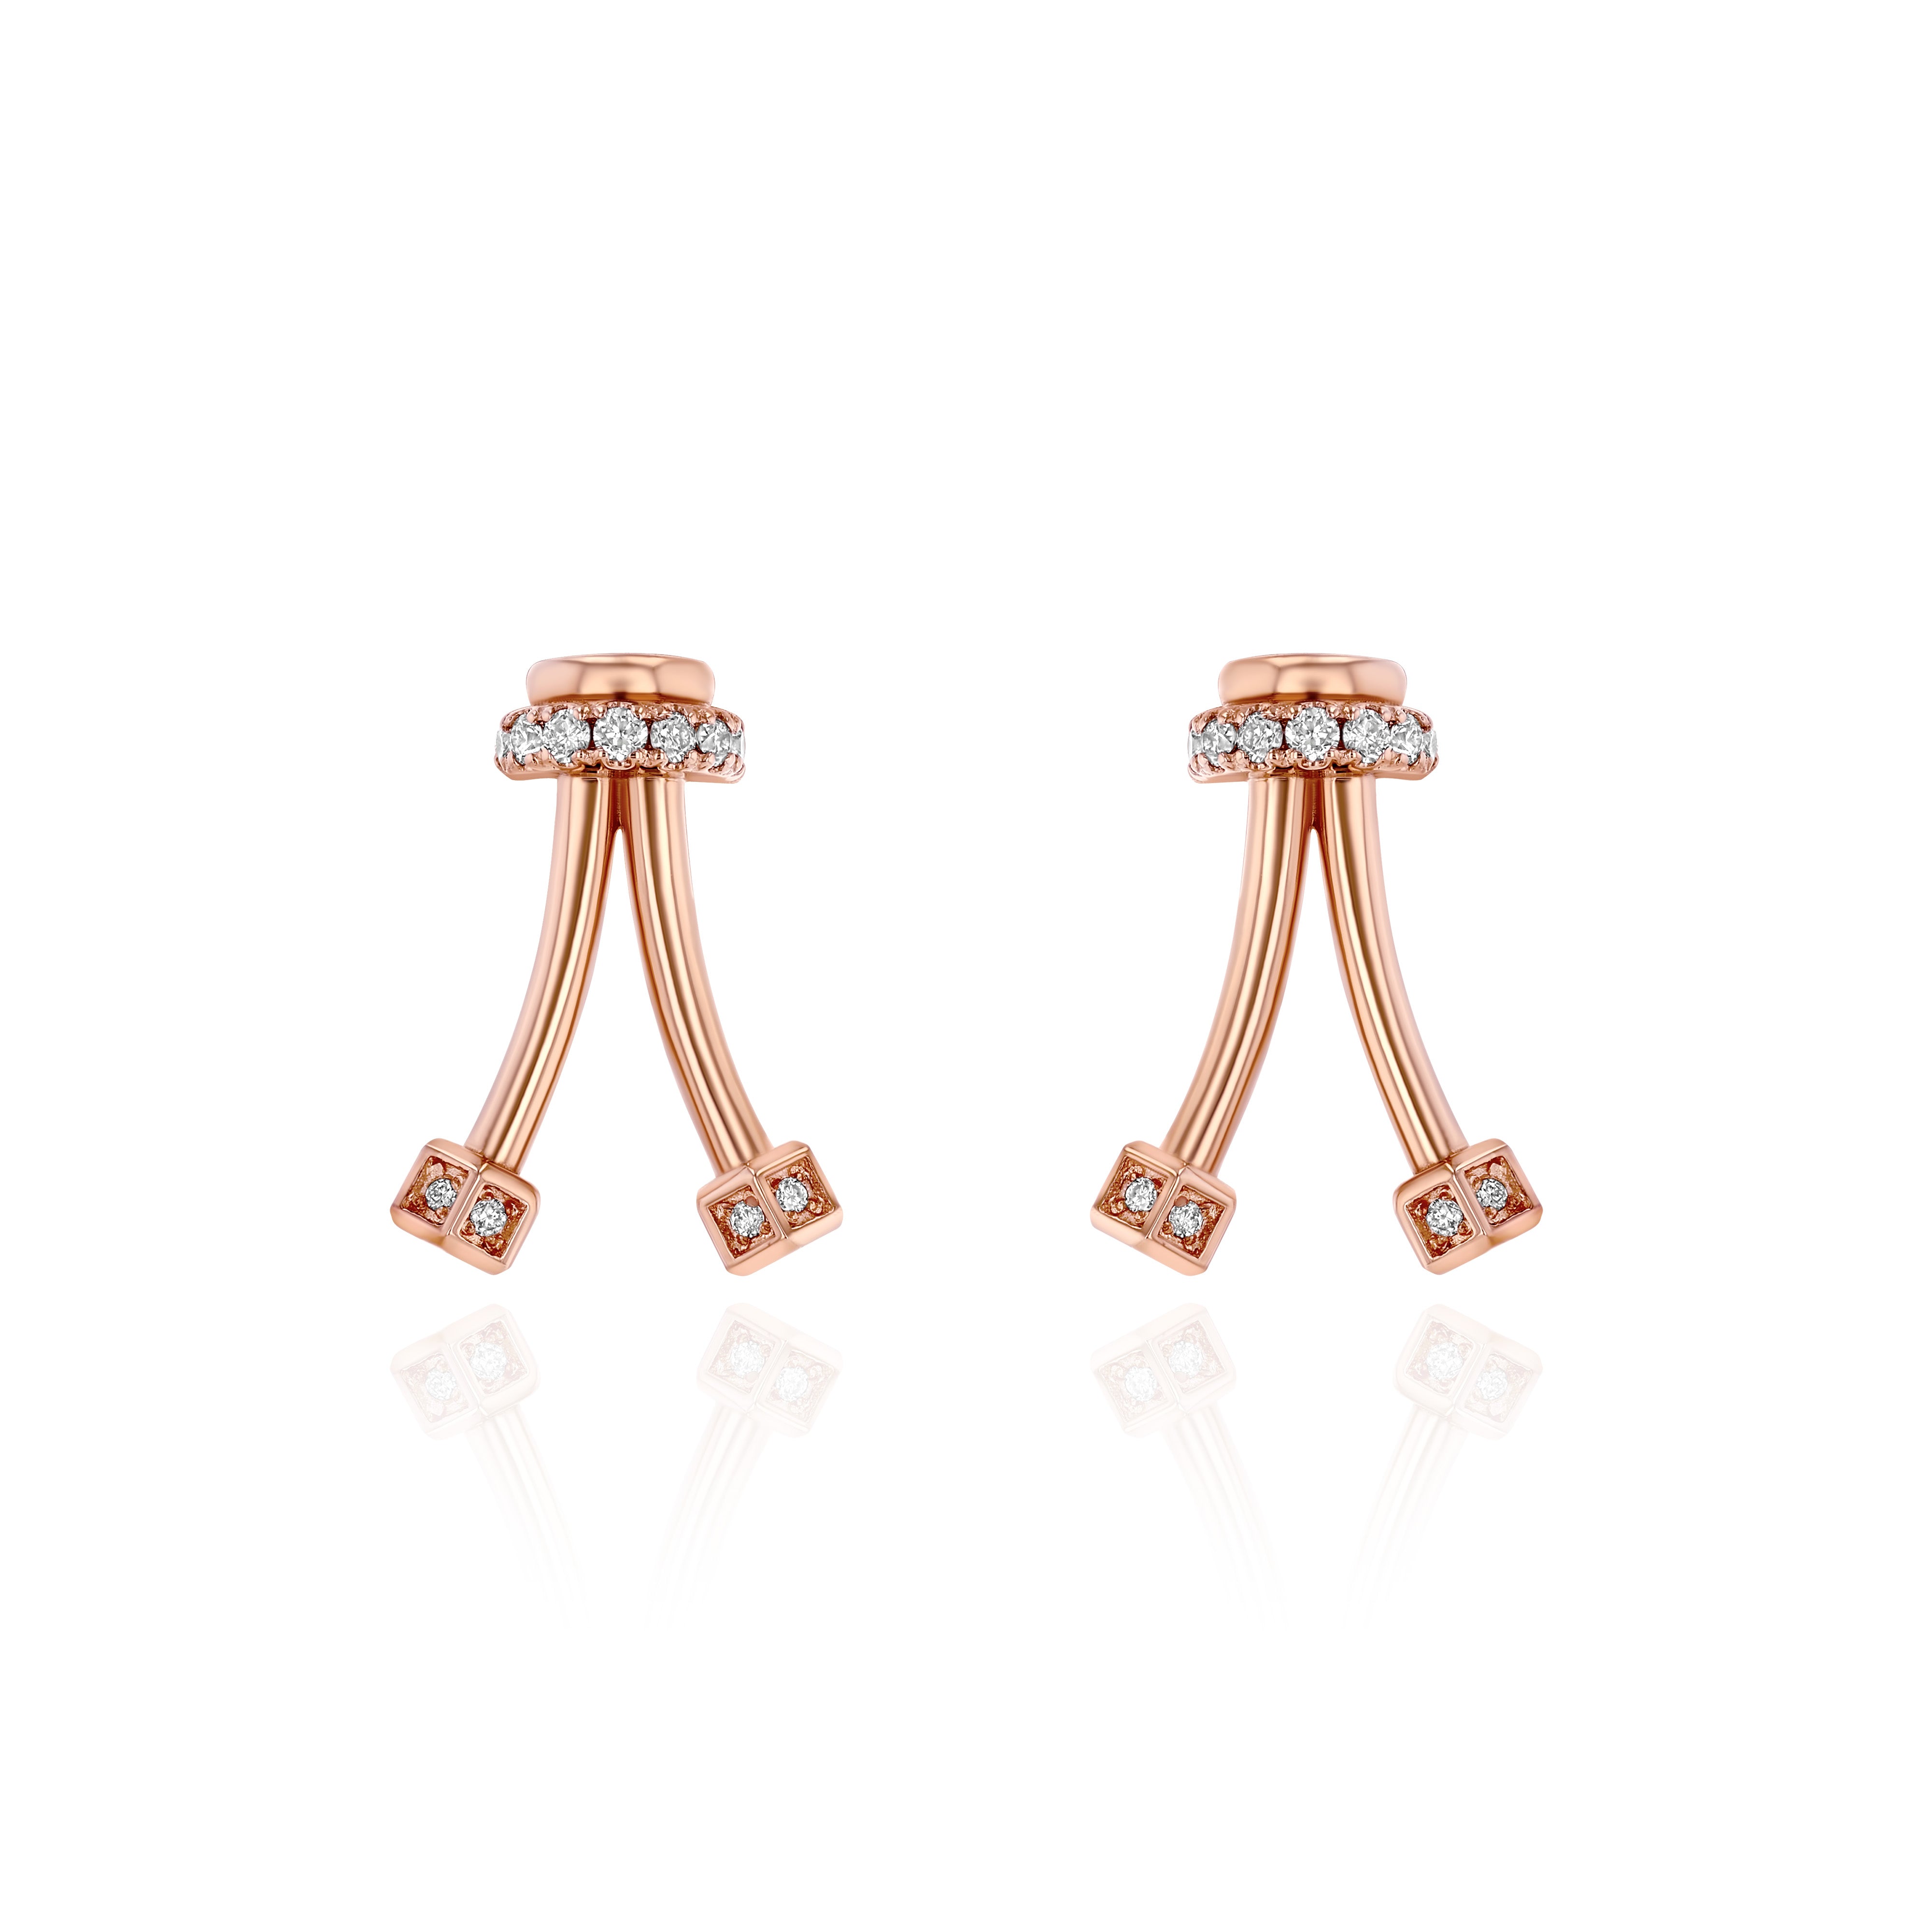 Rose Gold upside down V shaped Earrings with Diamond encrusted ends, Small